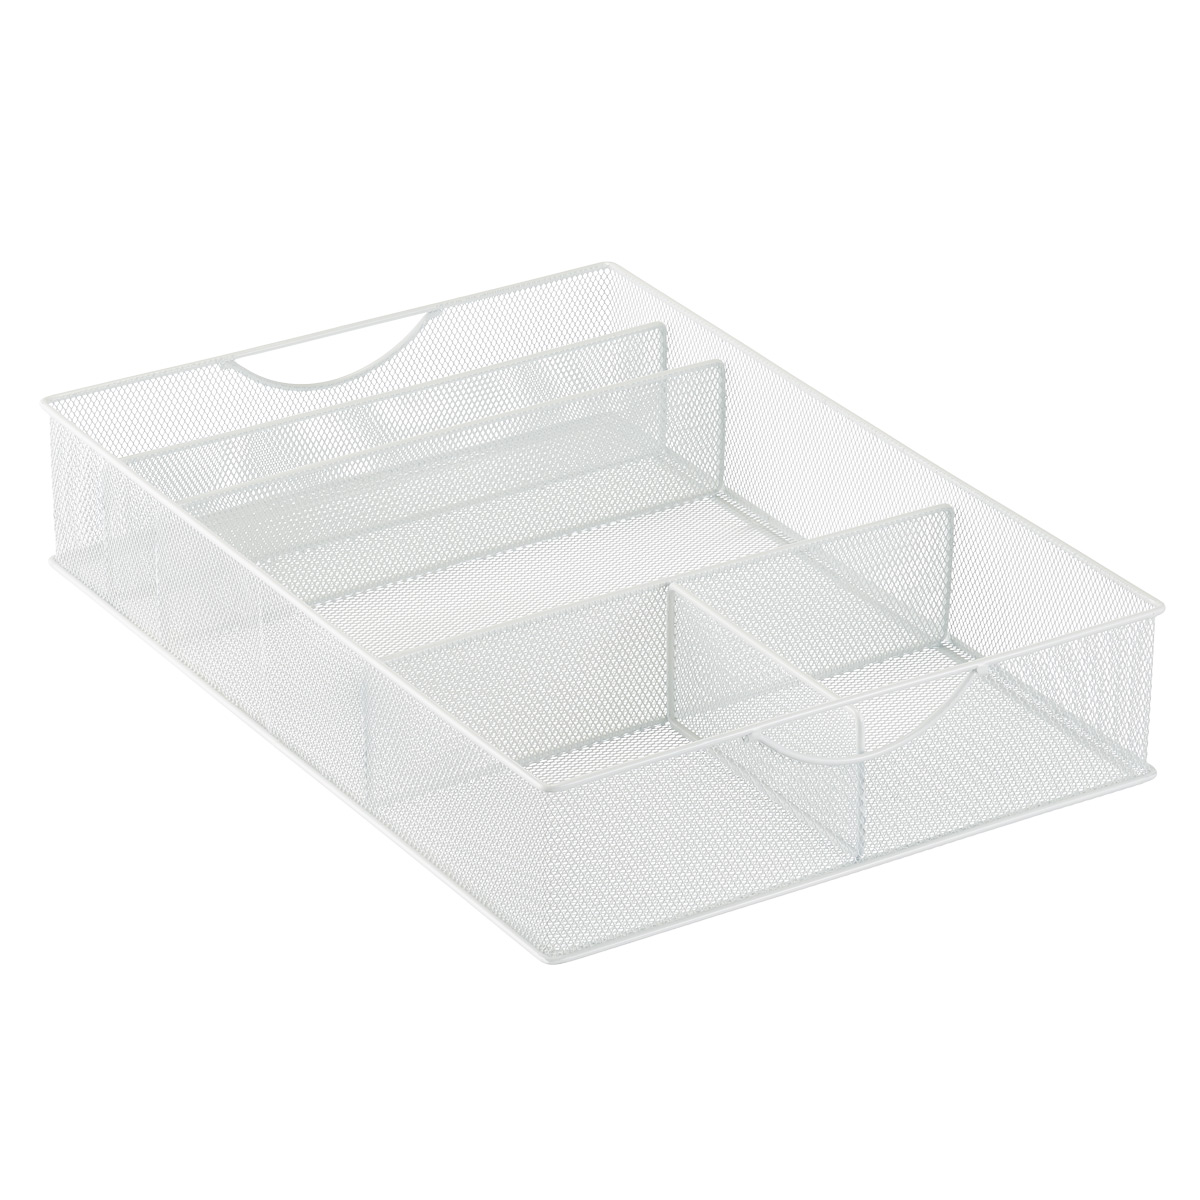 5-Section Mesh Food Storage Organizer | The Container Store